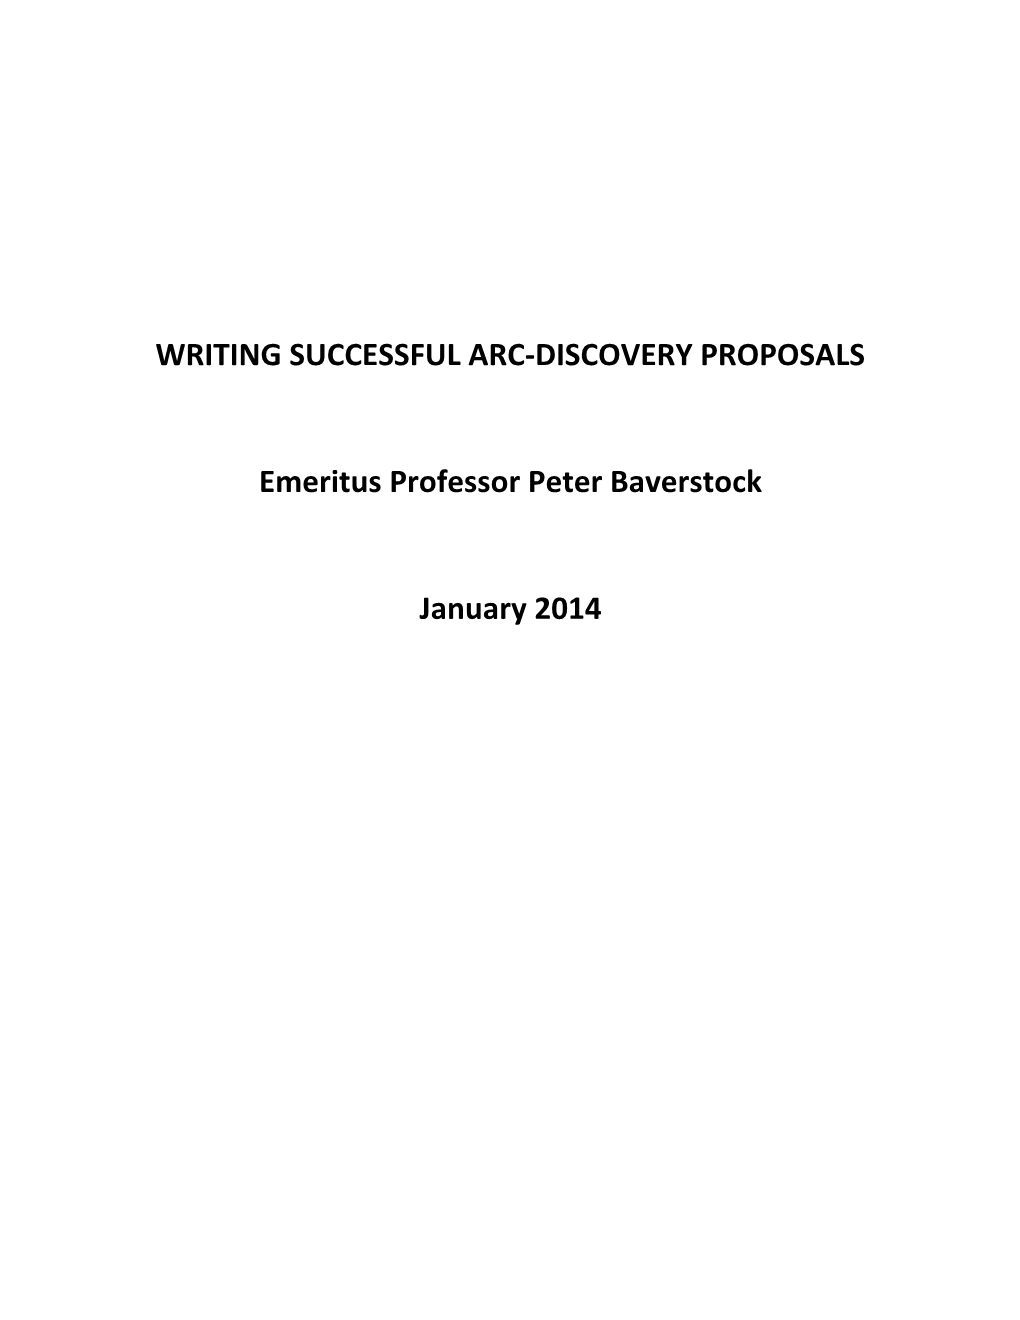 Writing Successful Arc-Discovery Proposals